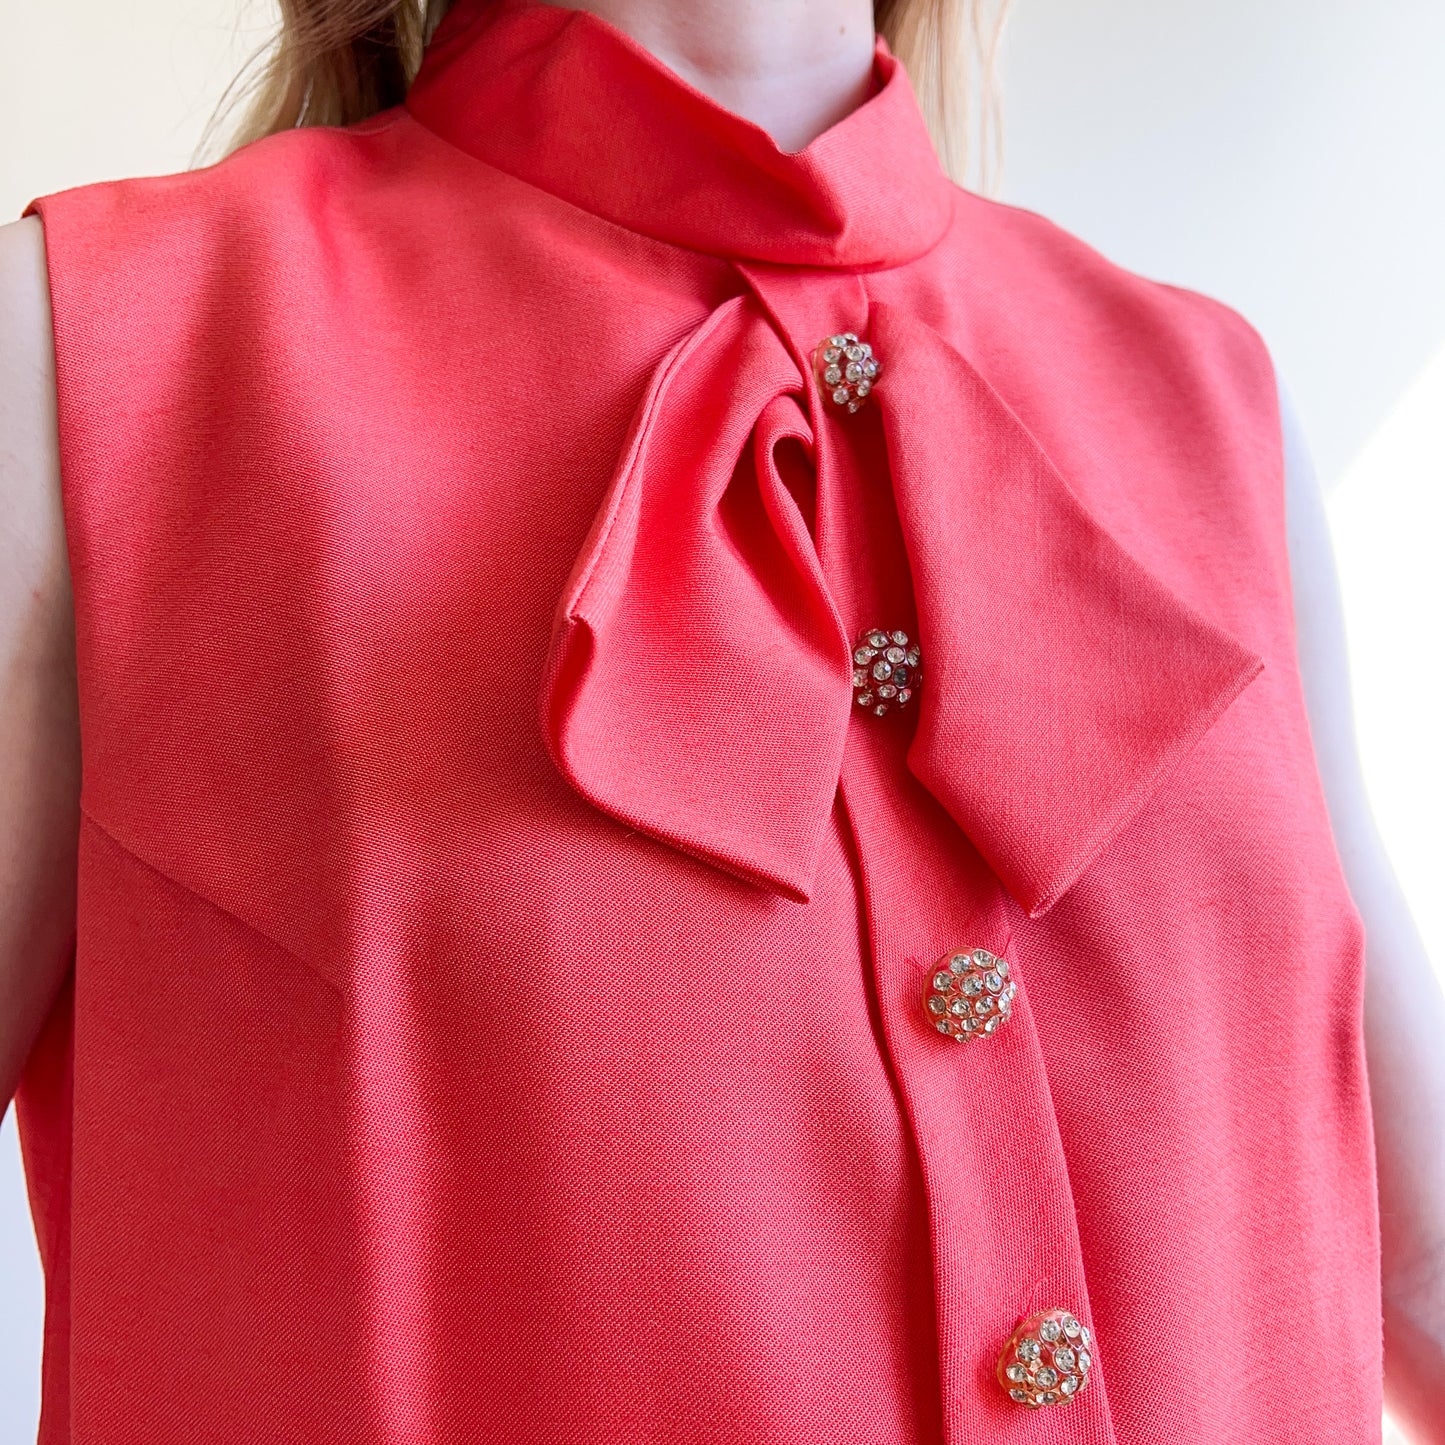 1960s Coral Shift Dress With Bow and Rhinestone Buttons (L/XL)